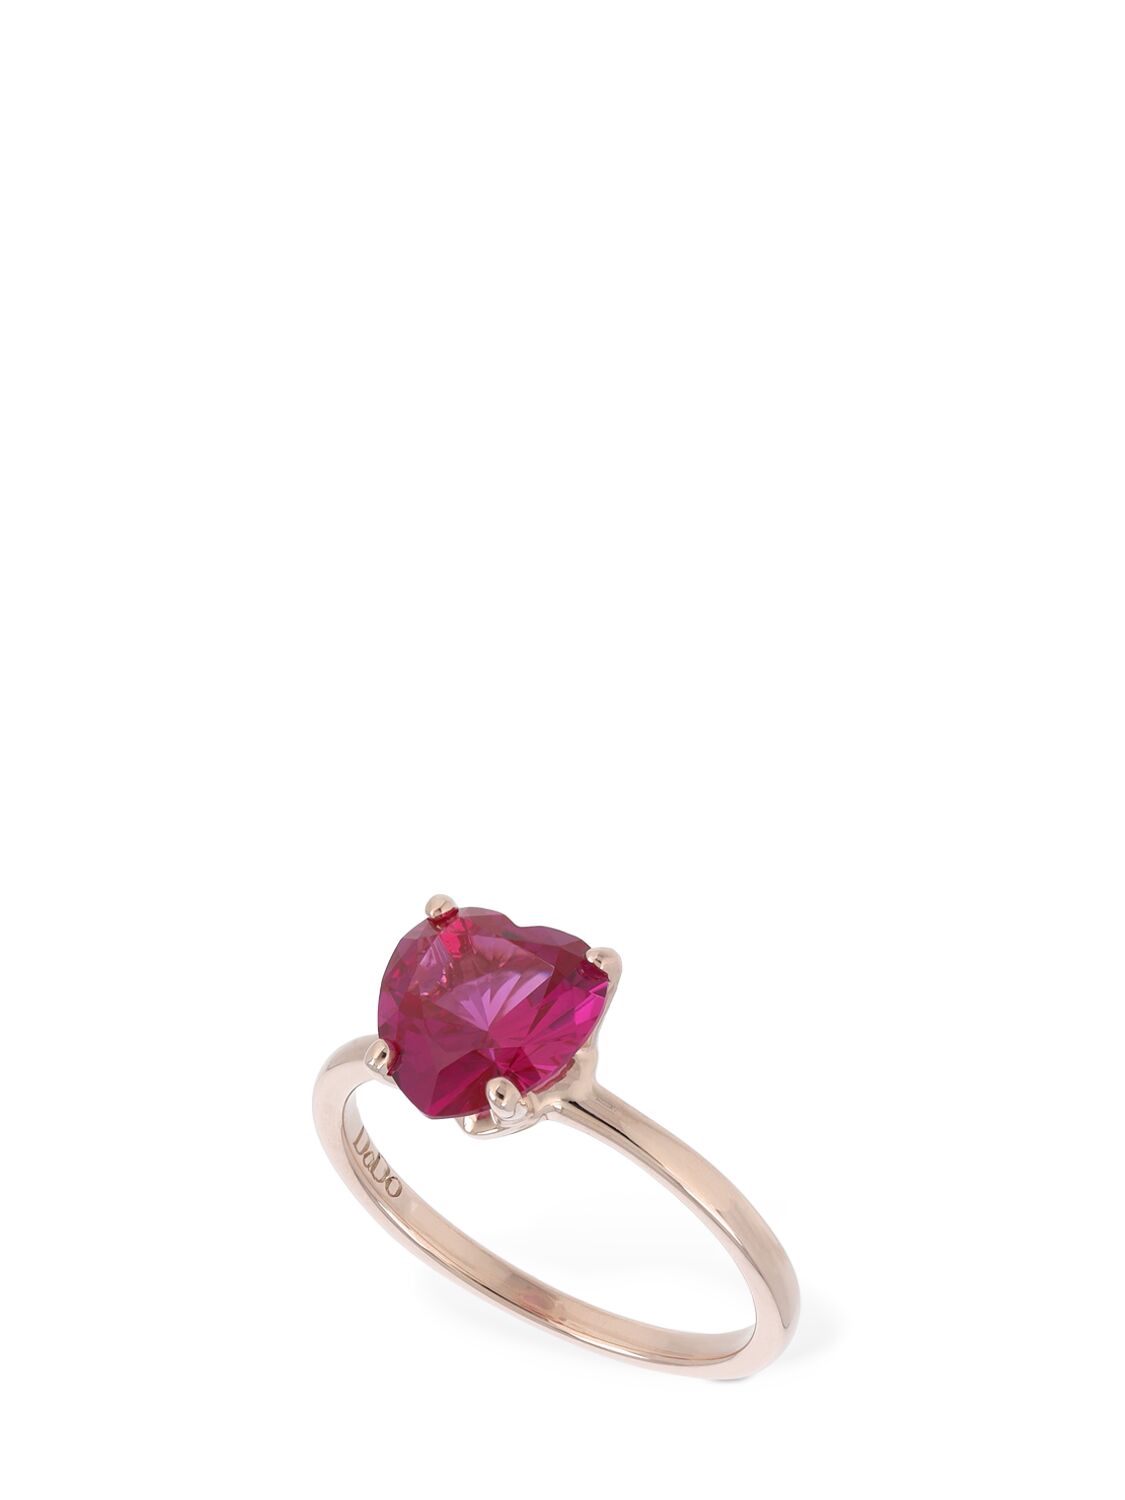 9kt Rose Gold Heart Synthetic Ruby Ring – WOMEN > JEWELRY & WATCHES > RINGS